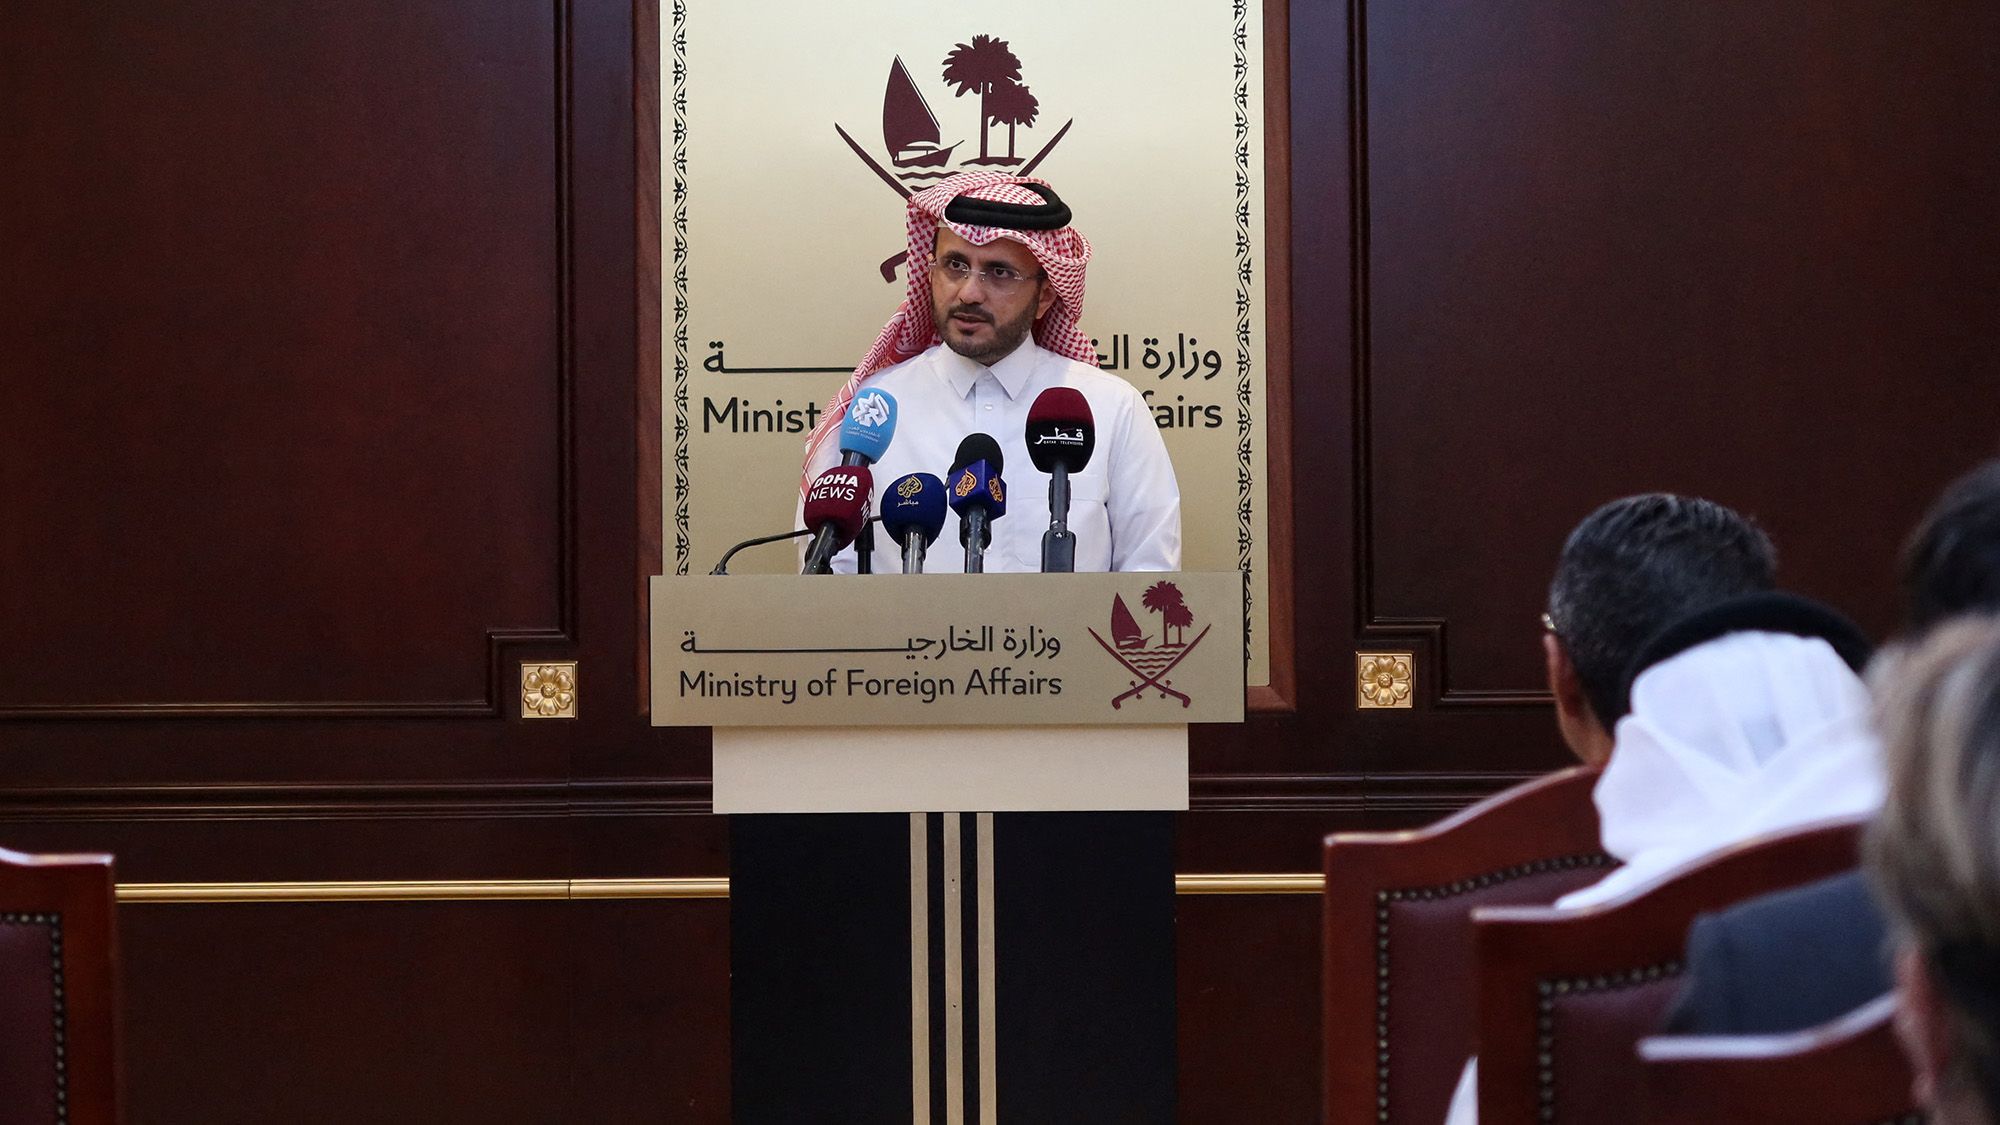 Qatar's Spokesperson for the Ministry of Foreign Affairs, Majed Al-Ansari, speaks to journalists during a press conference in Doha, Qatar, on November 23.